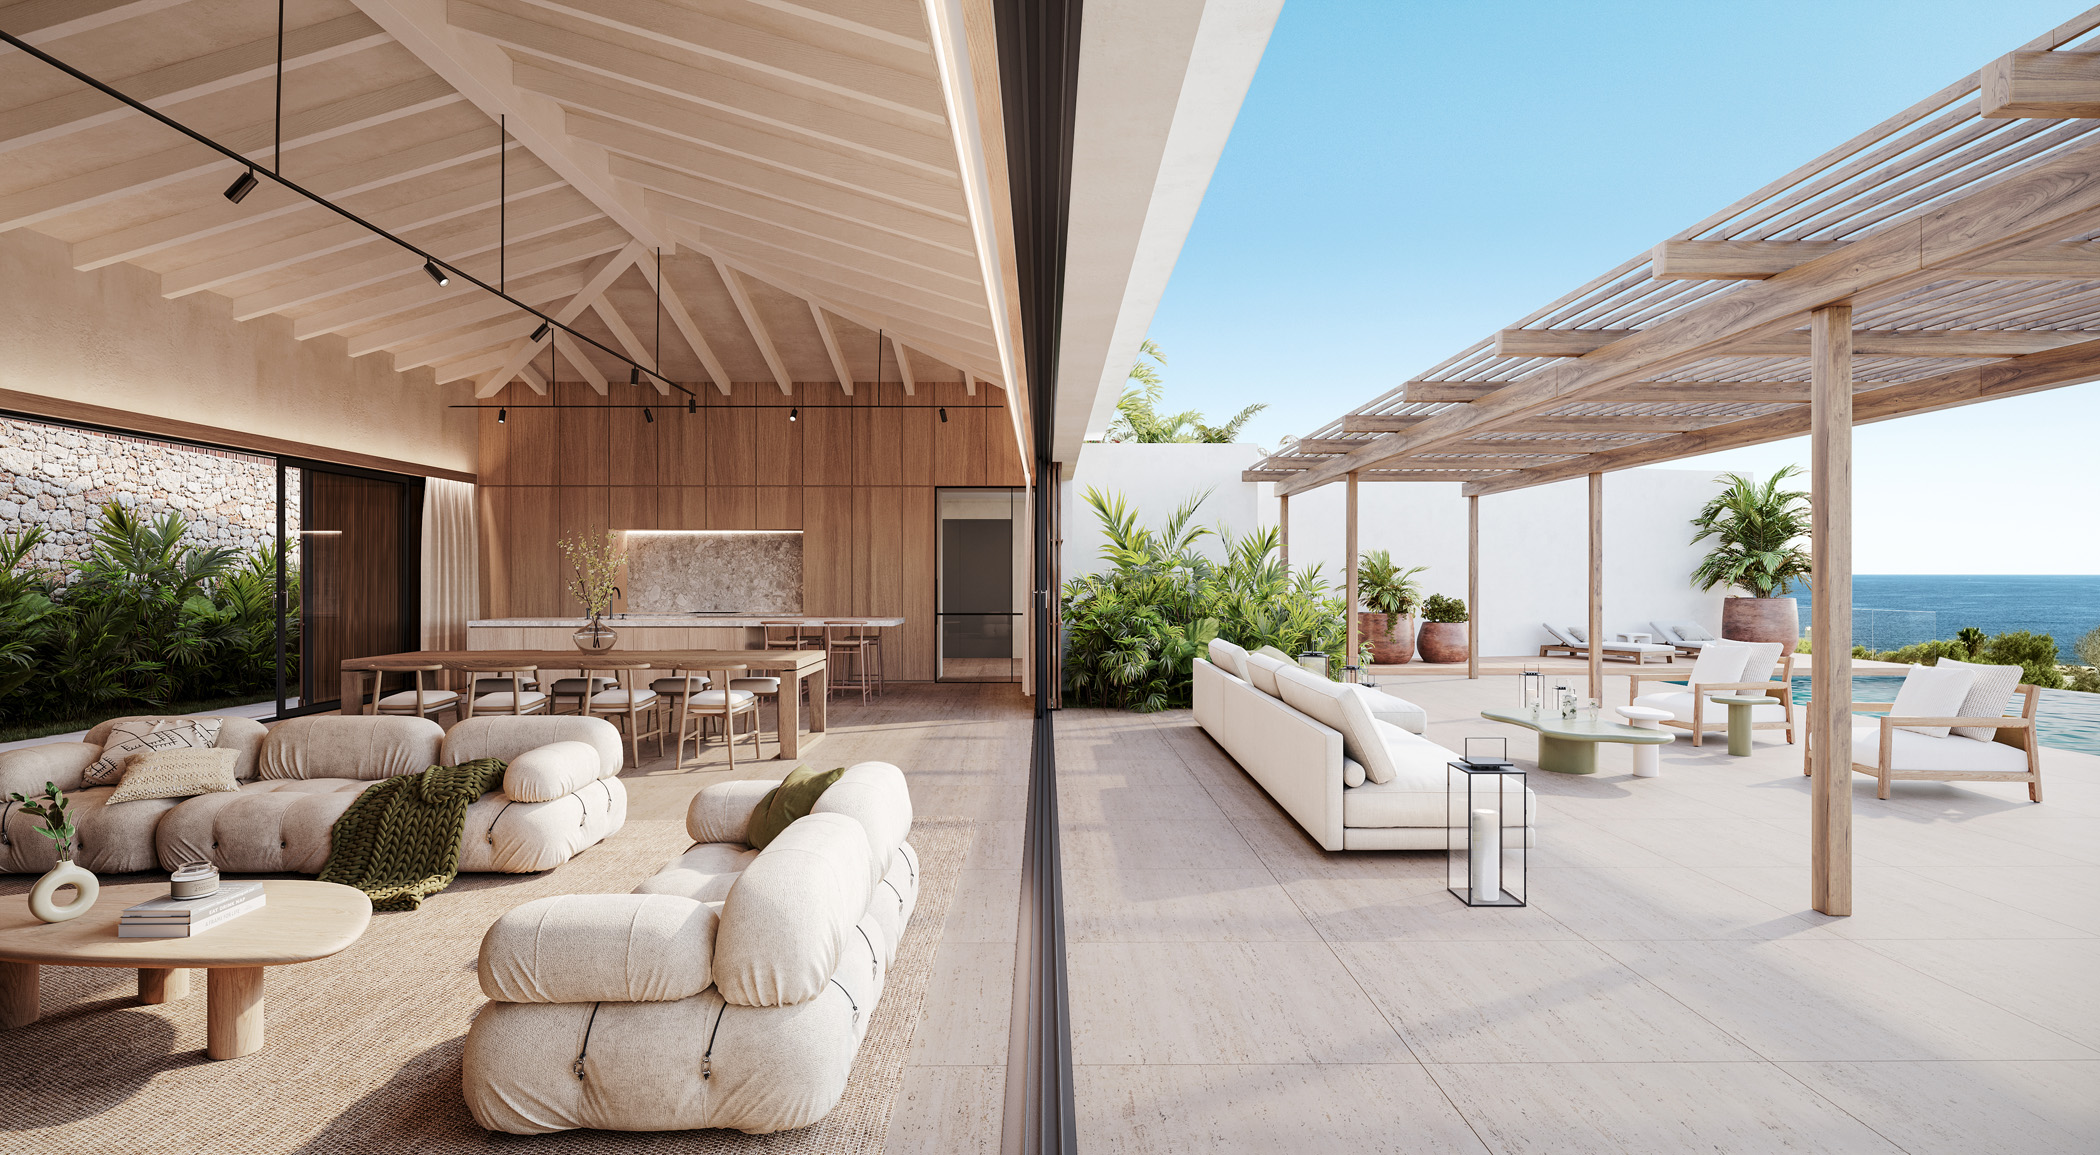 Render showing the reception room and sheletered terrace of a luxury villa in Ibiza